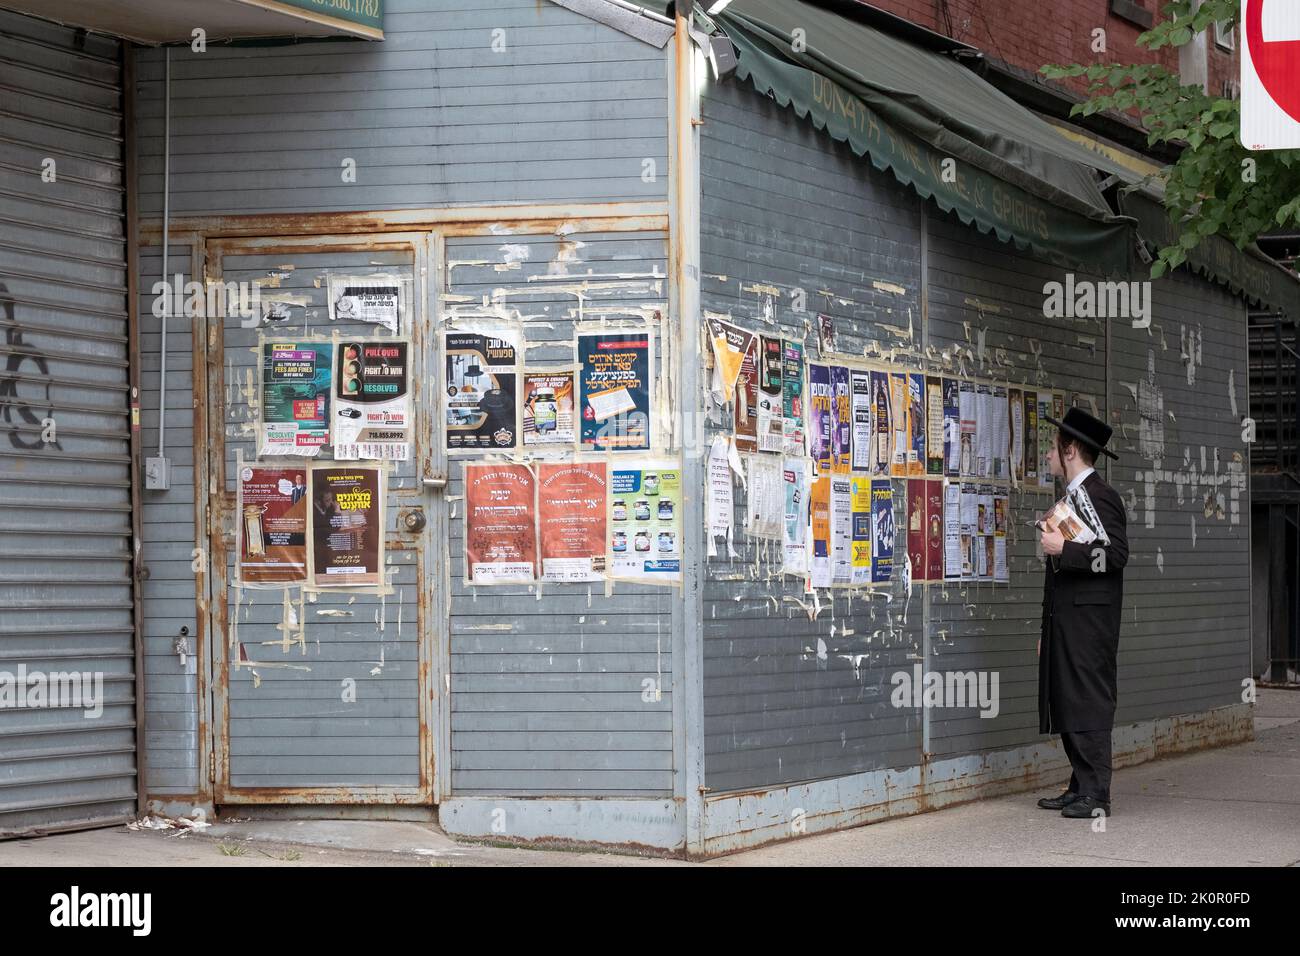 A Hasidic Jewish young man read signs just off Lee Avenue in Williamsburg that are in Yiddish, Hebrew and English. Stock Photo